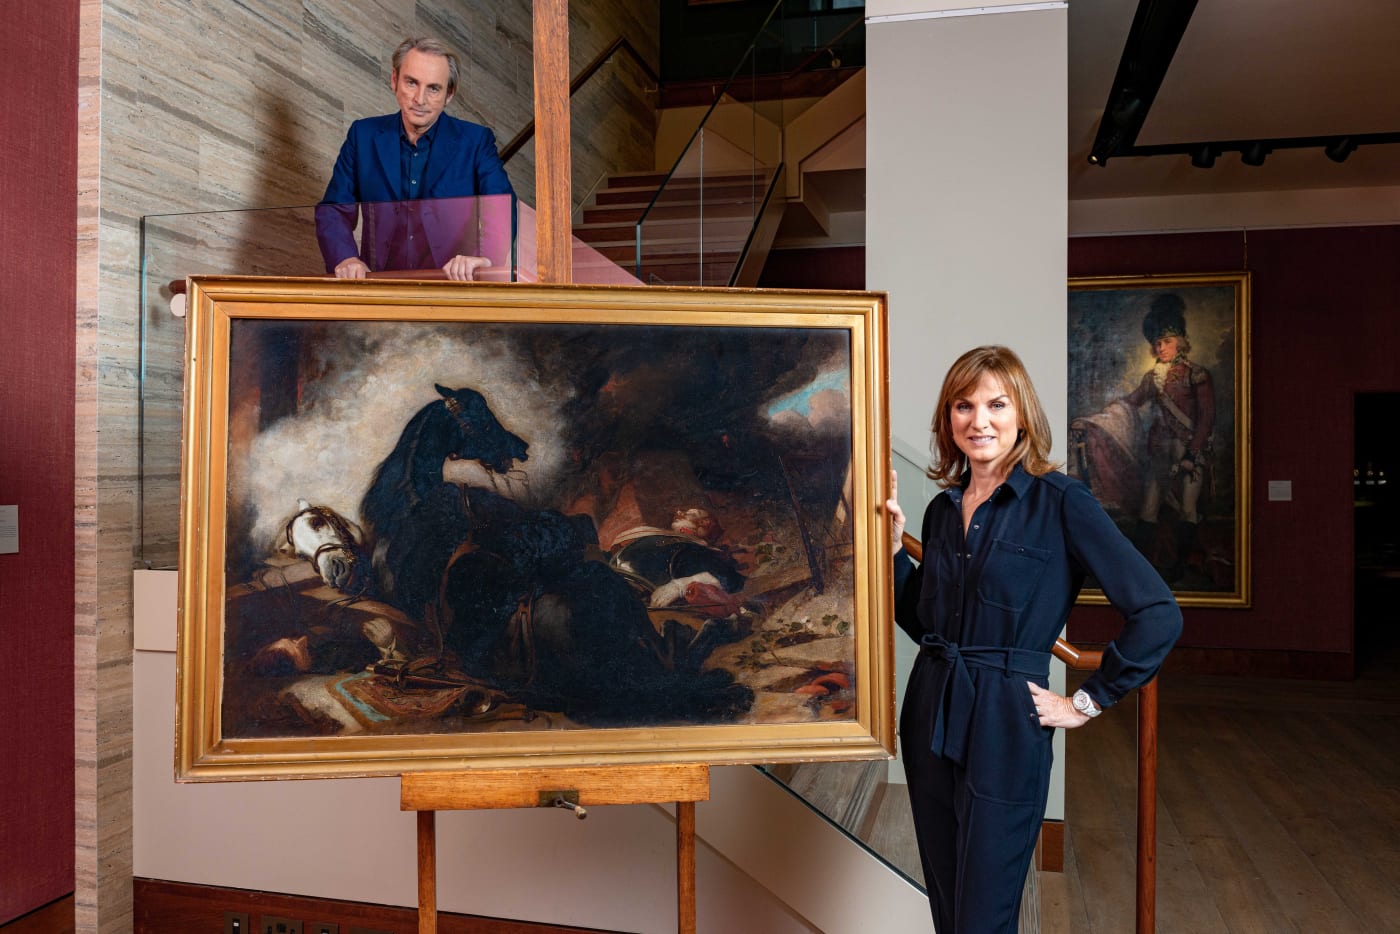 Philip Mould and Fiona Bruce photographed for Fake or Fortune infront of an artwork whiich could be by Edwin Landseer